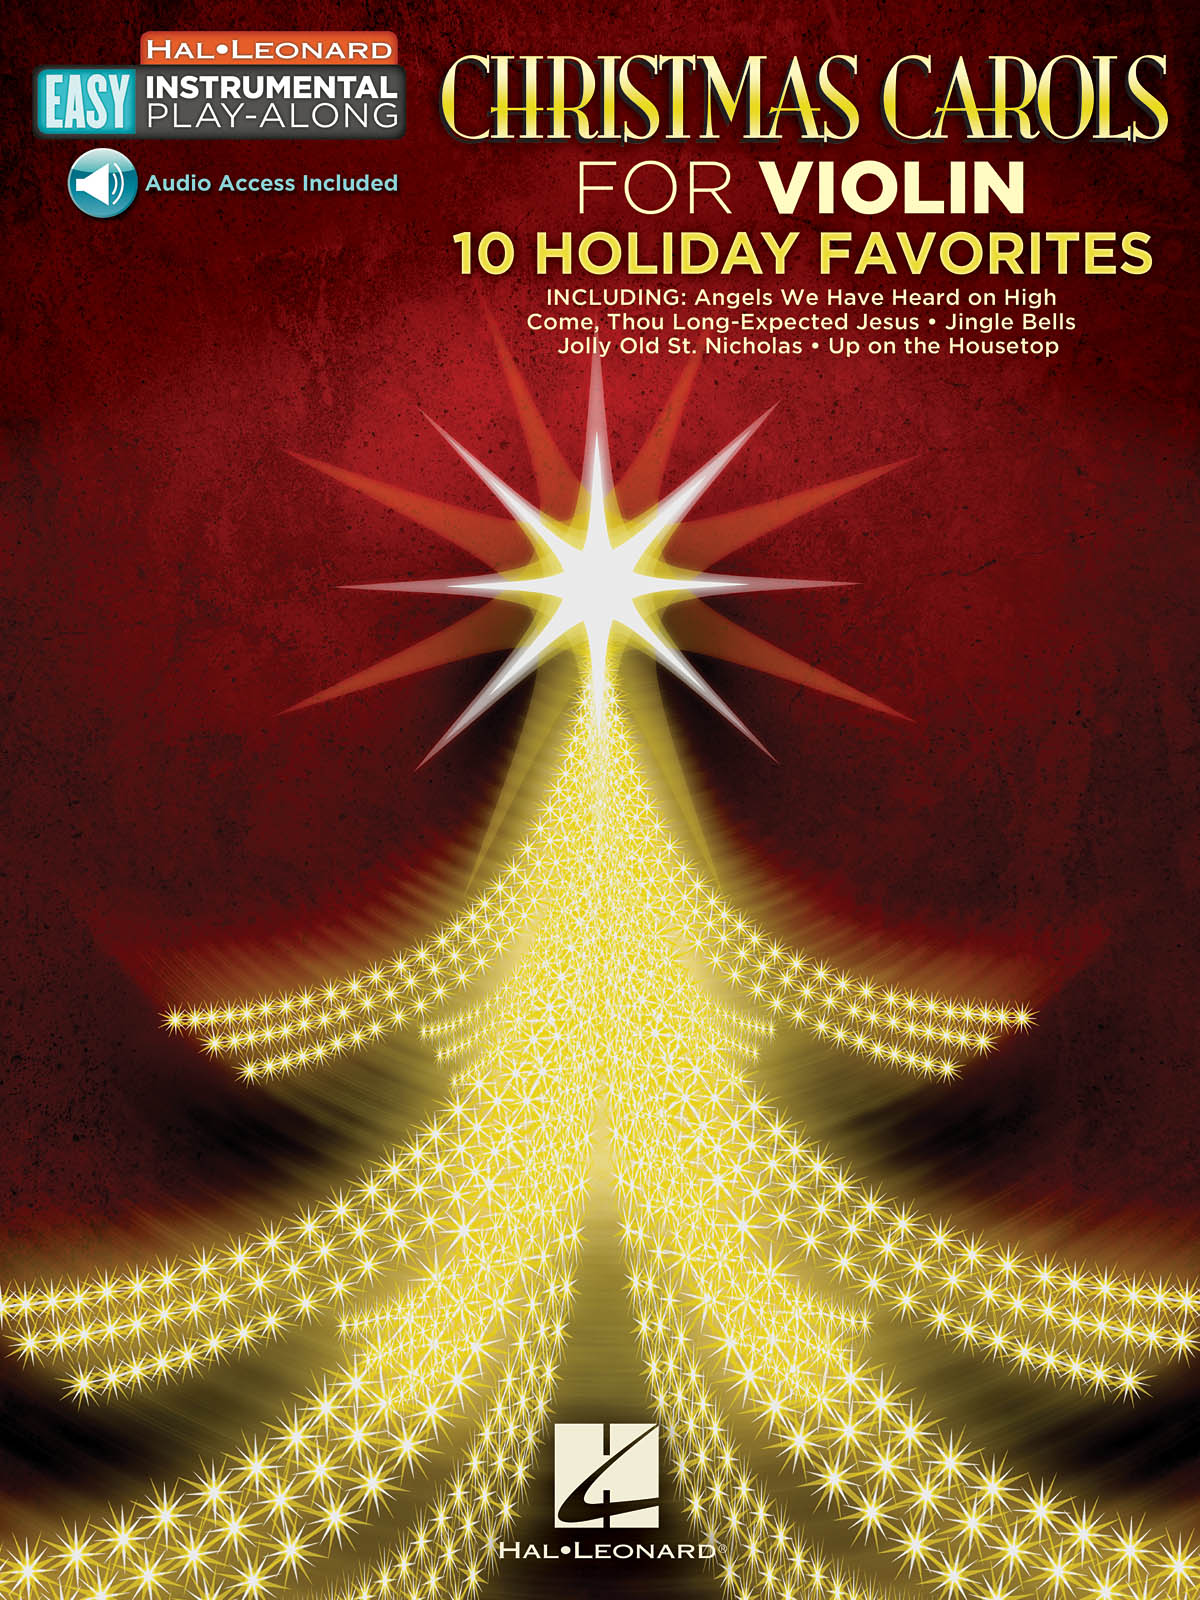 Christmas Carols - Violin: 10 Holiday Favorites - Easy Instrumental Play-Along Book with Online Audio Tracks - noty pro housle